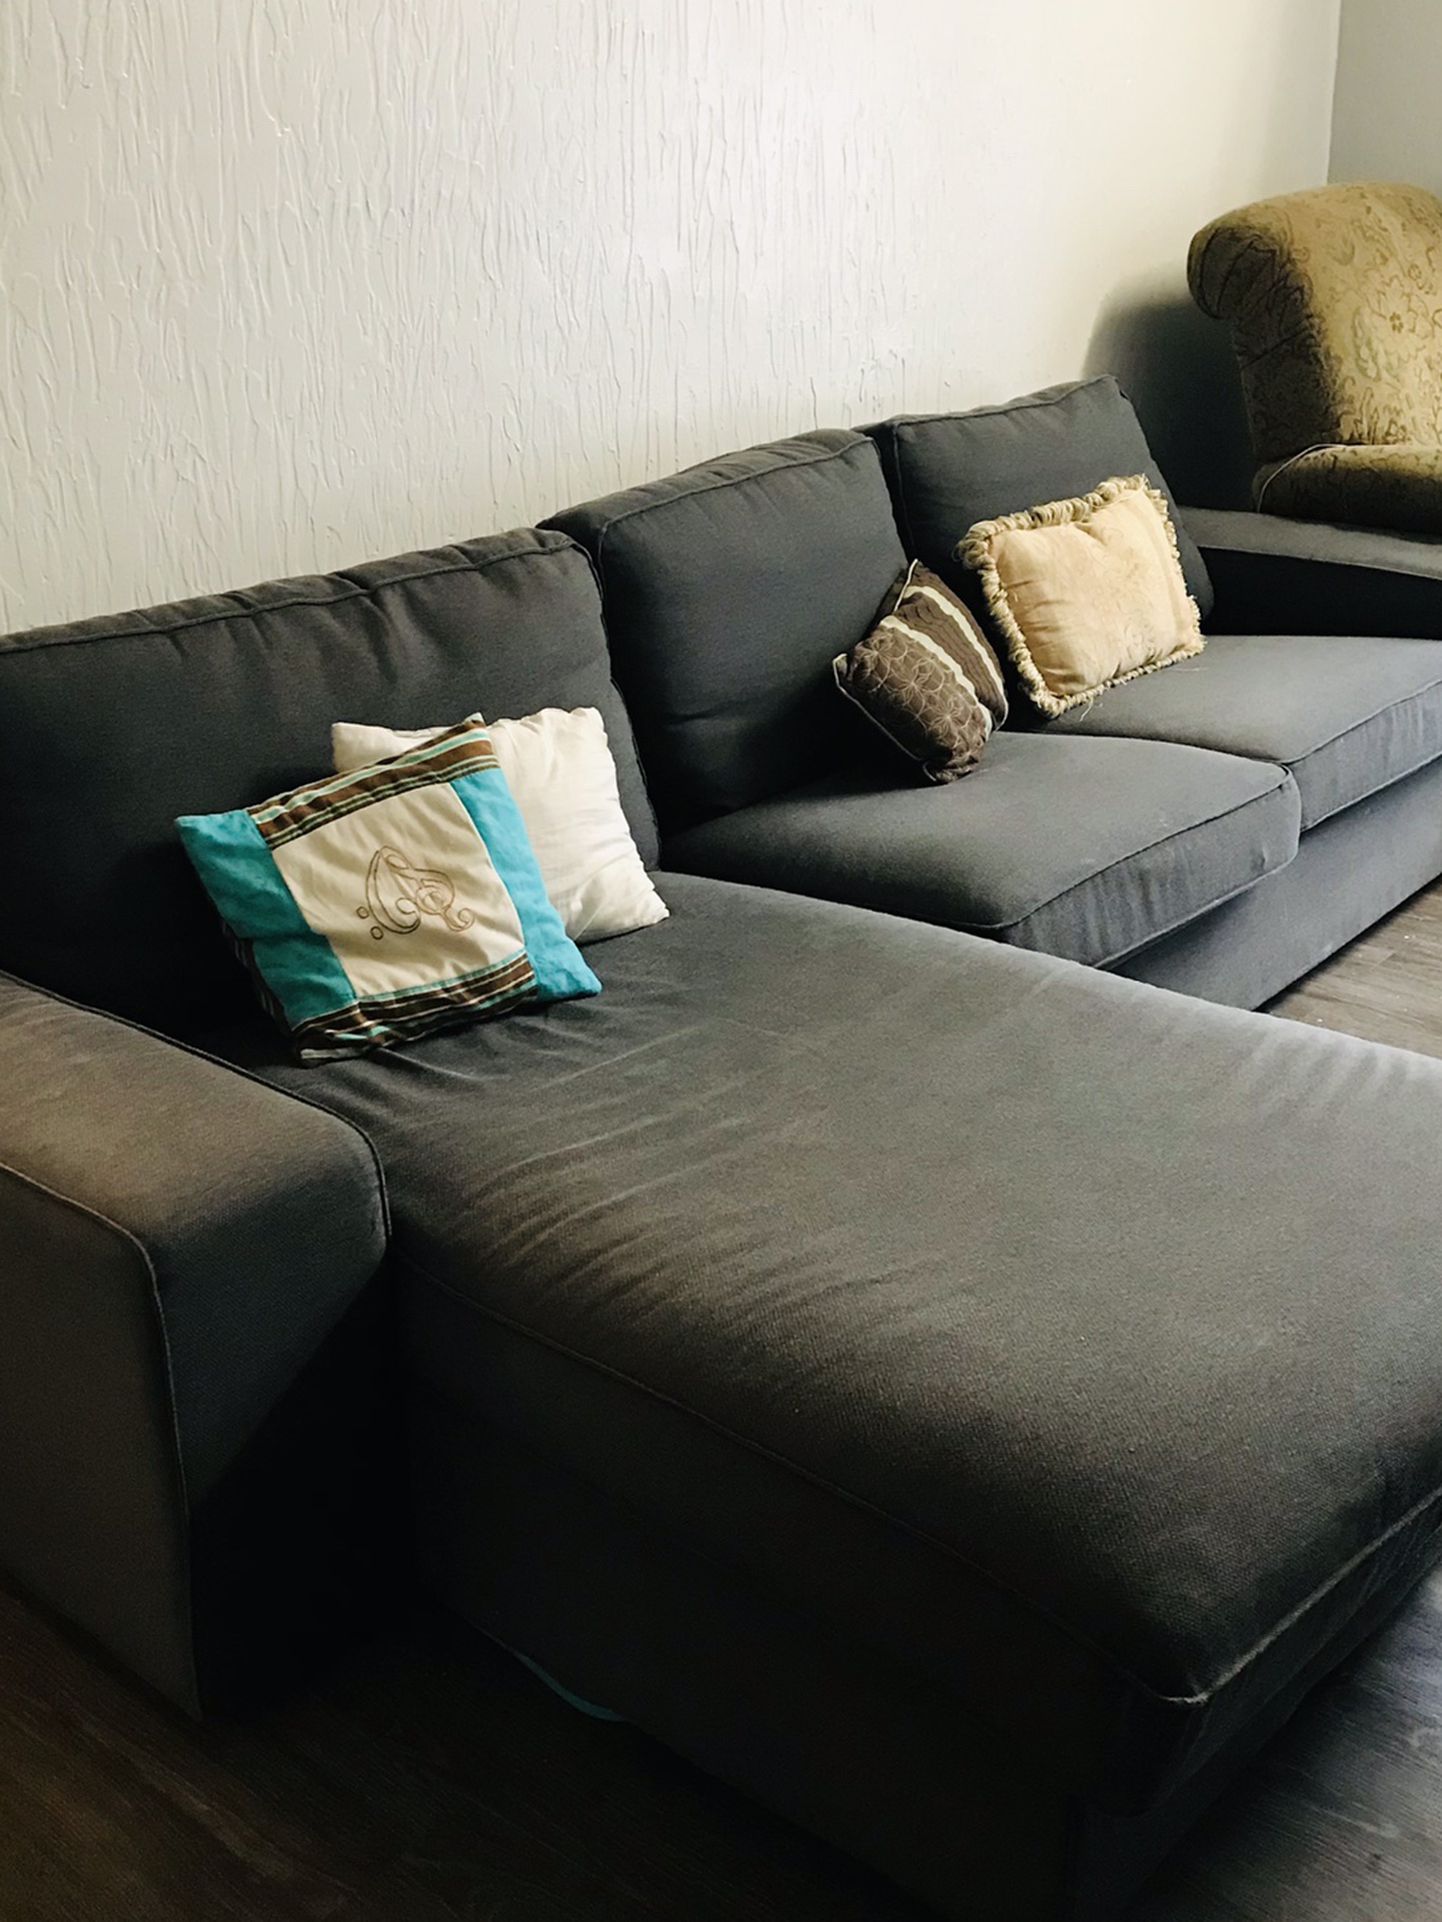 ikea couch